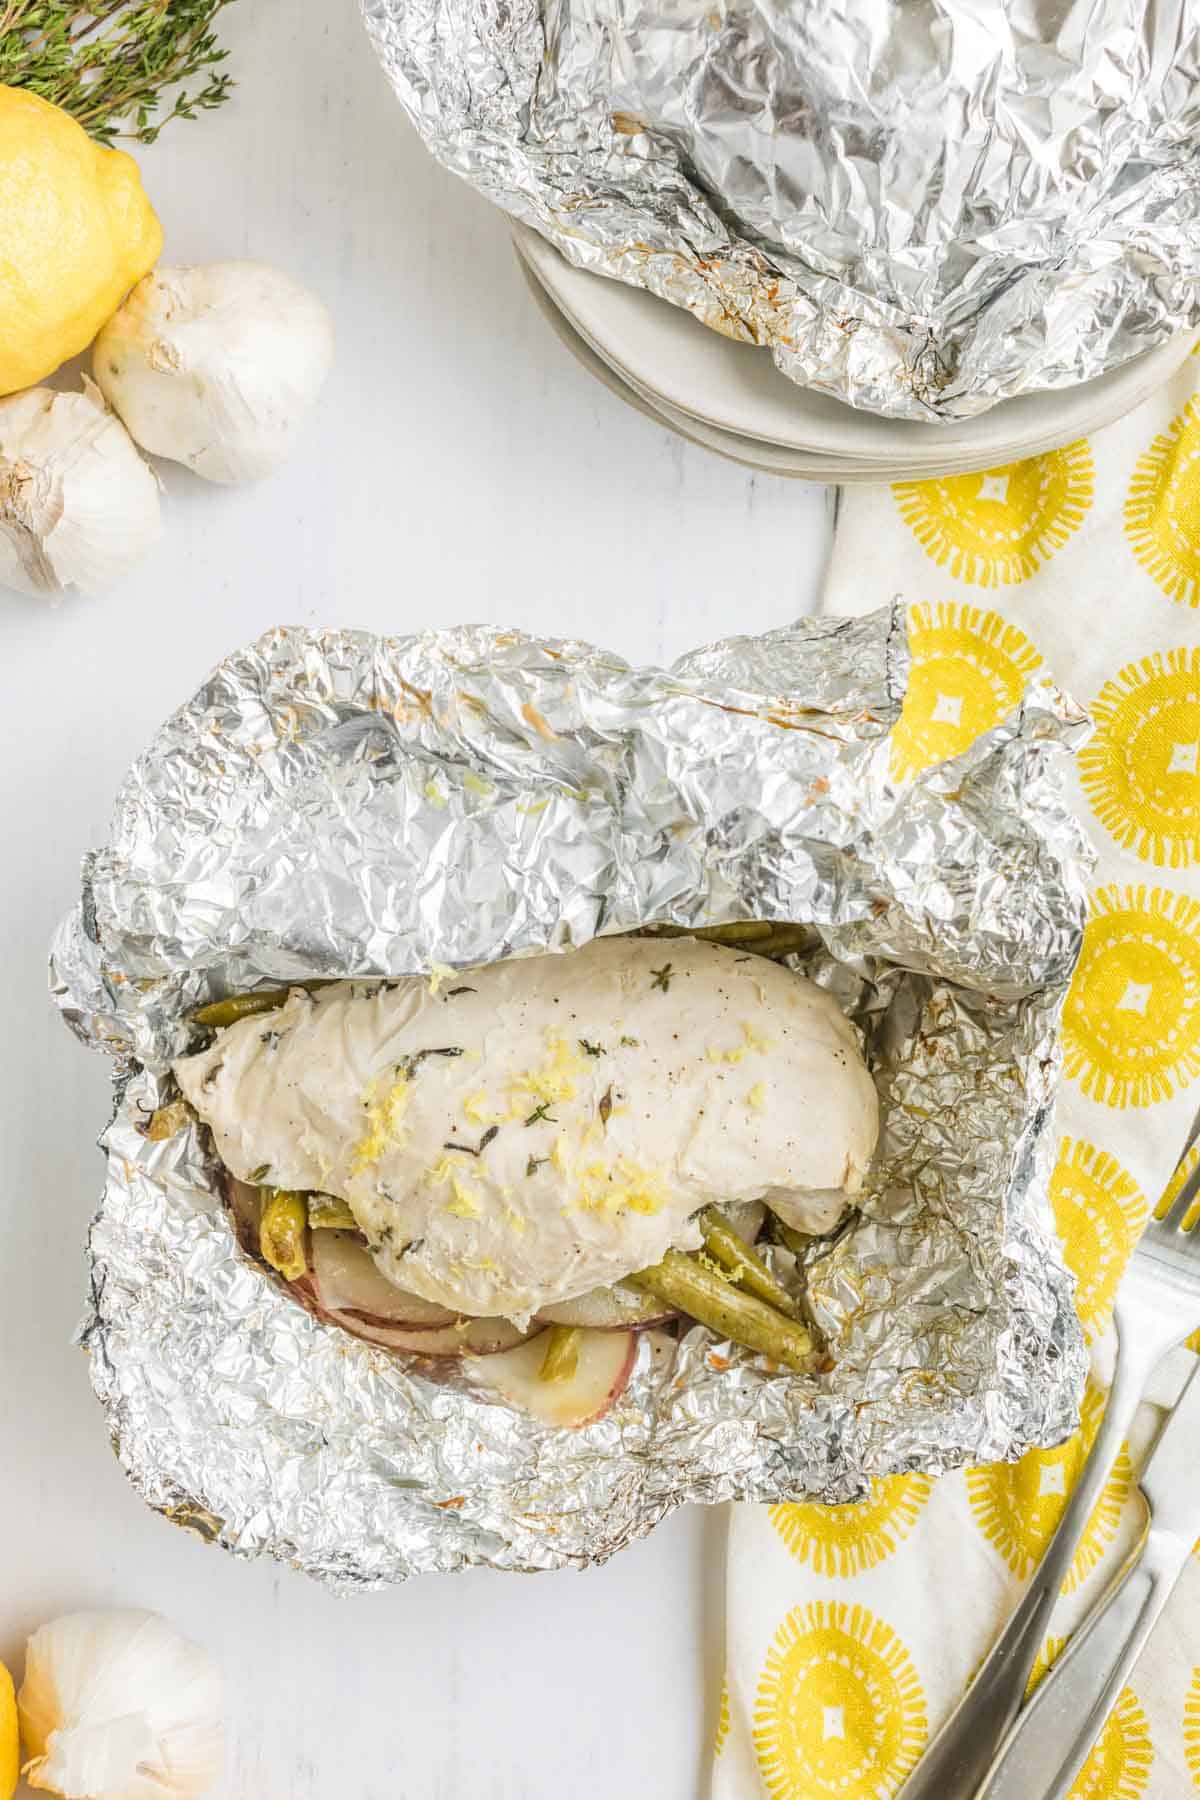 foil pack with chicken breast, green beans, and potatoes next to a yellow and white napkin, lemons, and heads of garlic